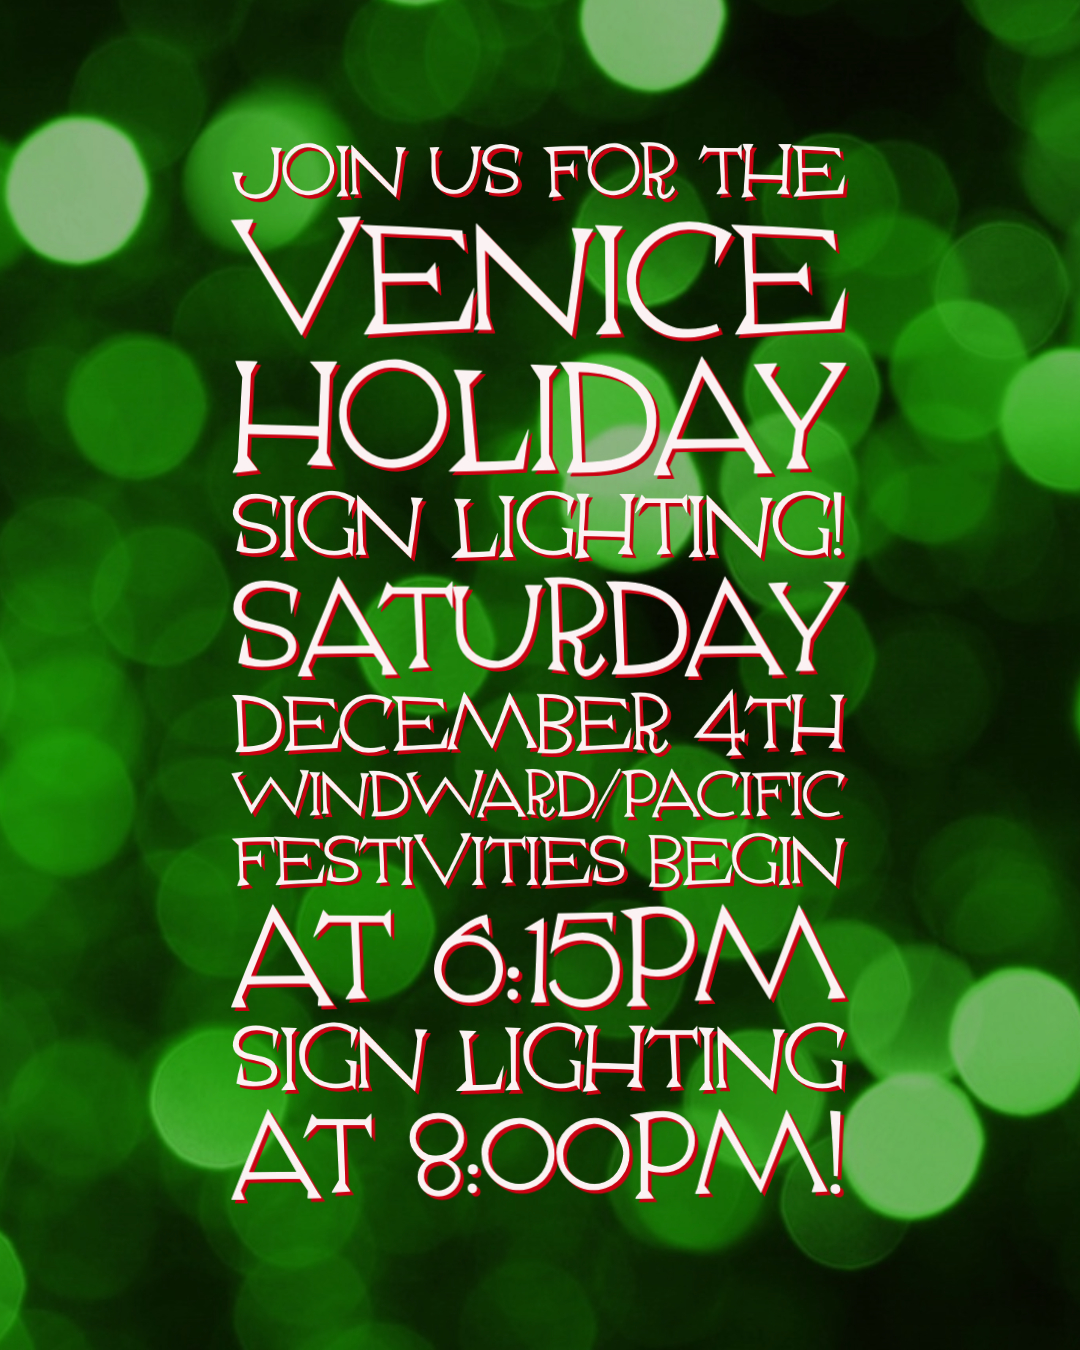 📣10th ANNUAL VENICE HOLIDAY SIGN LIGHTING~6-9pm❗️